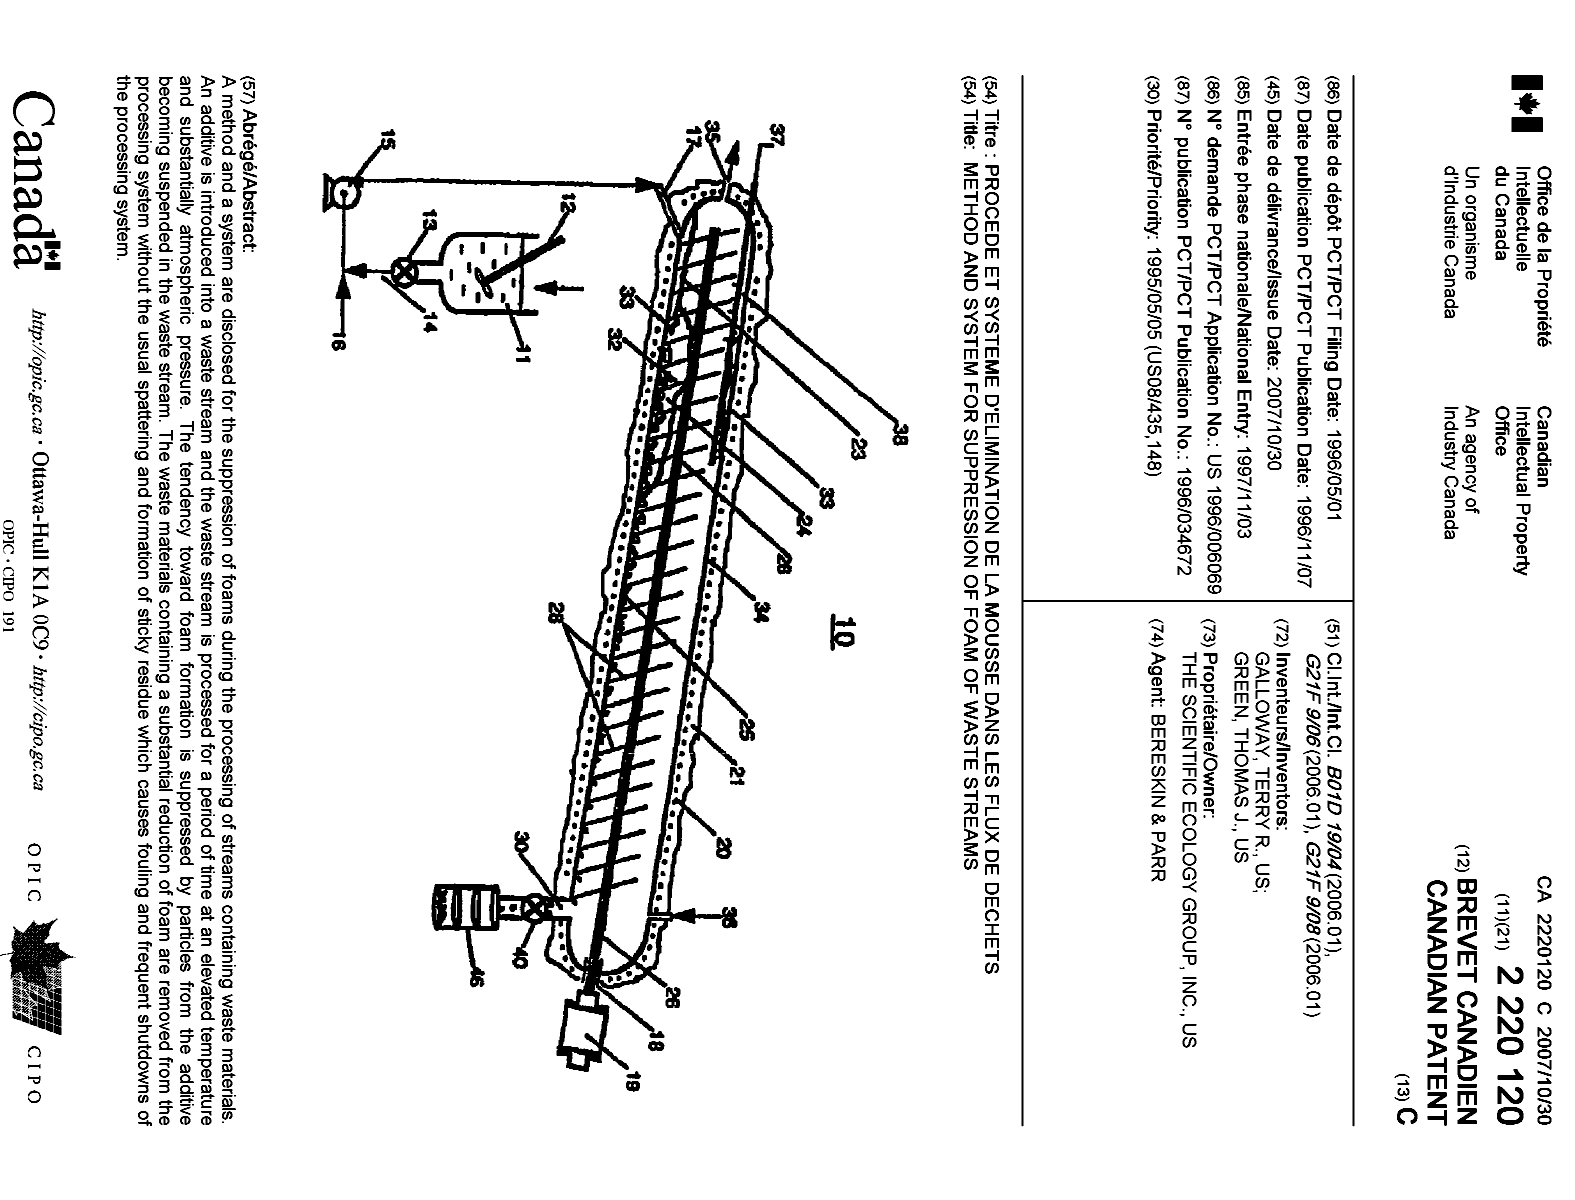 Canadian Patent Document 2220120. Cover Page 20071002. Image 1 of 1